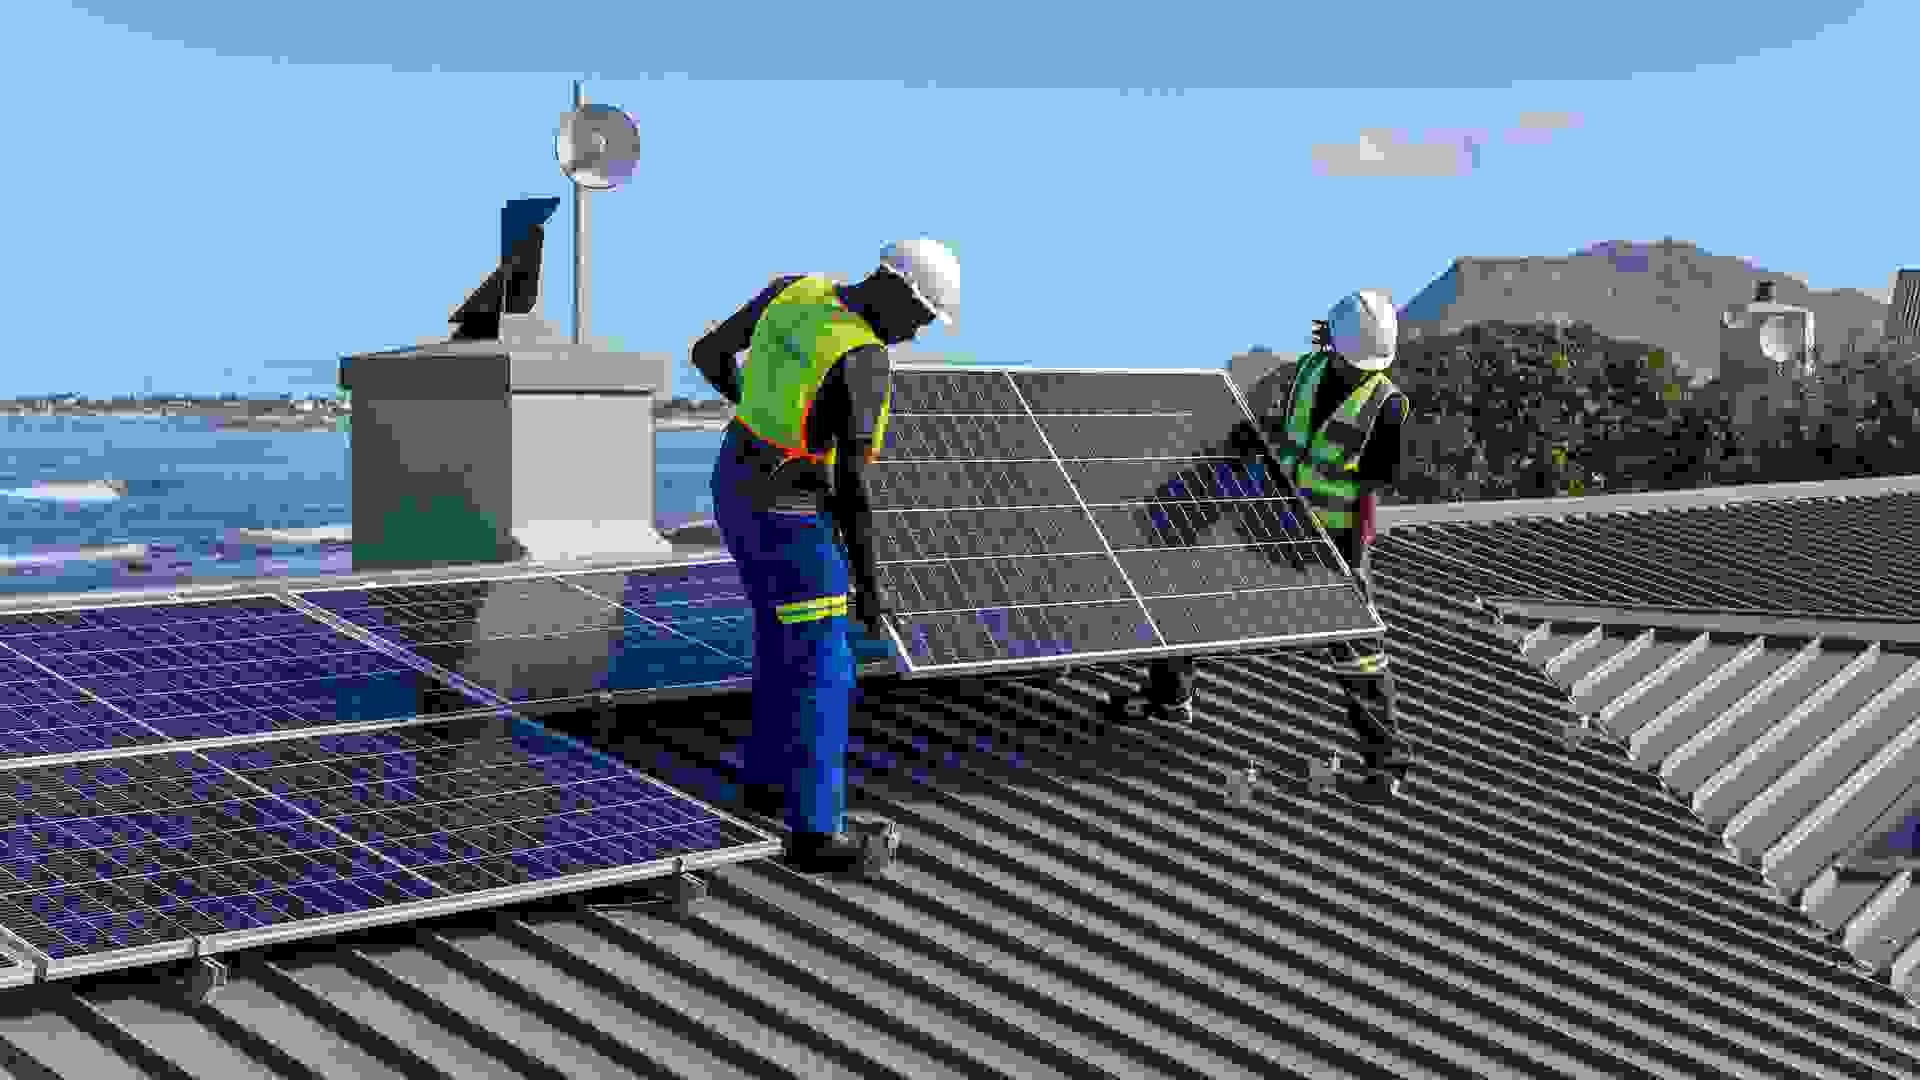 Two African men install solar panels neatly on a residential roof of a house near the ocean.